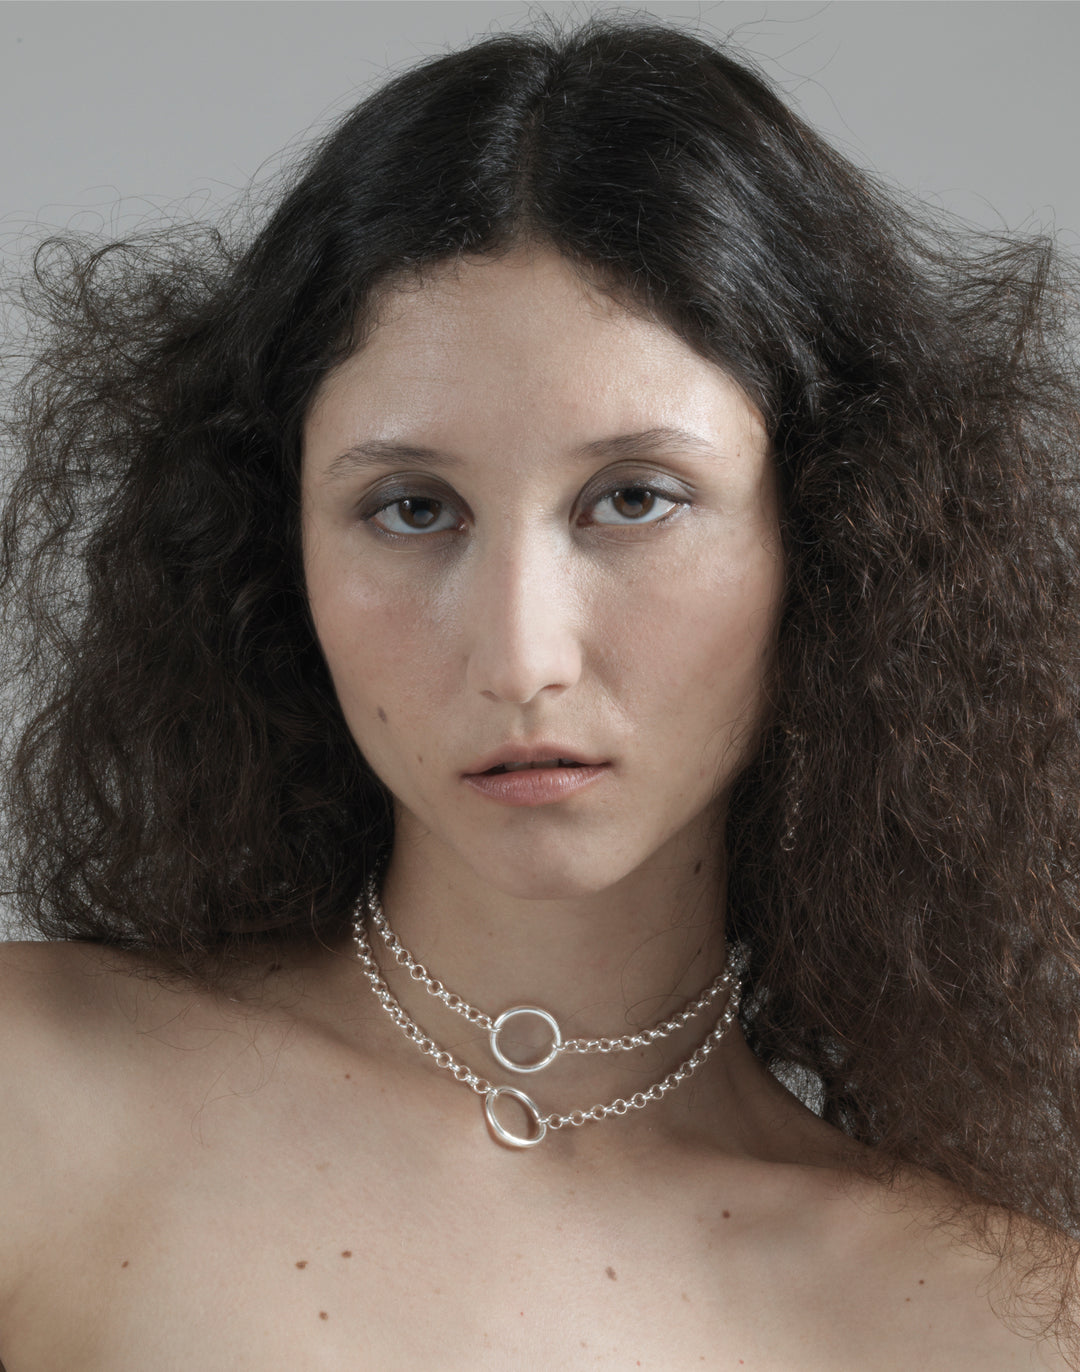 llayers Handmade silver chain choker necklace - Made In Brookyn New York